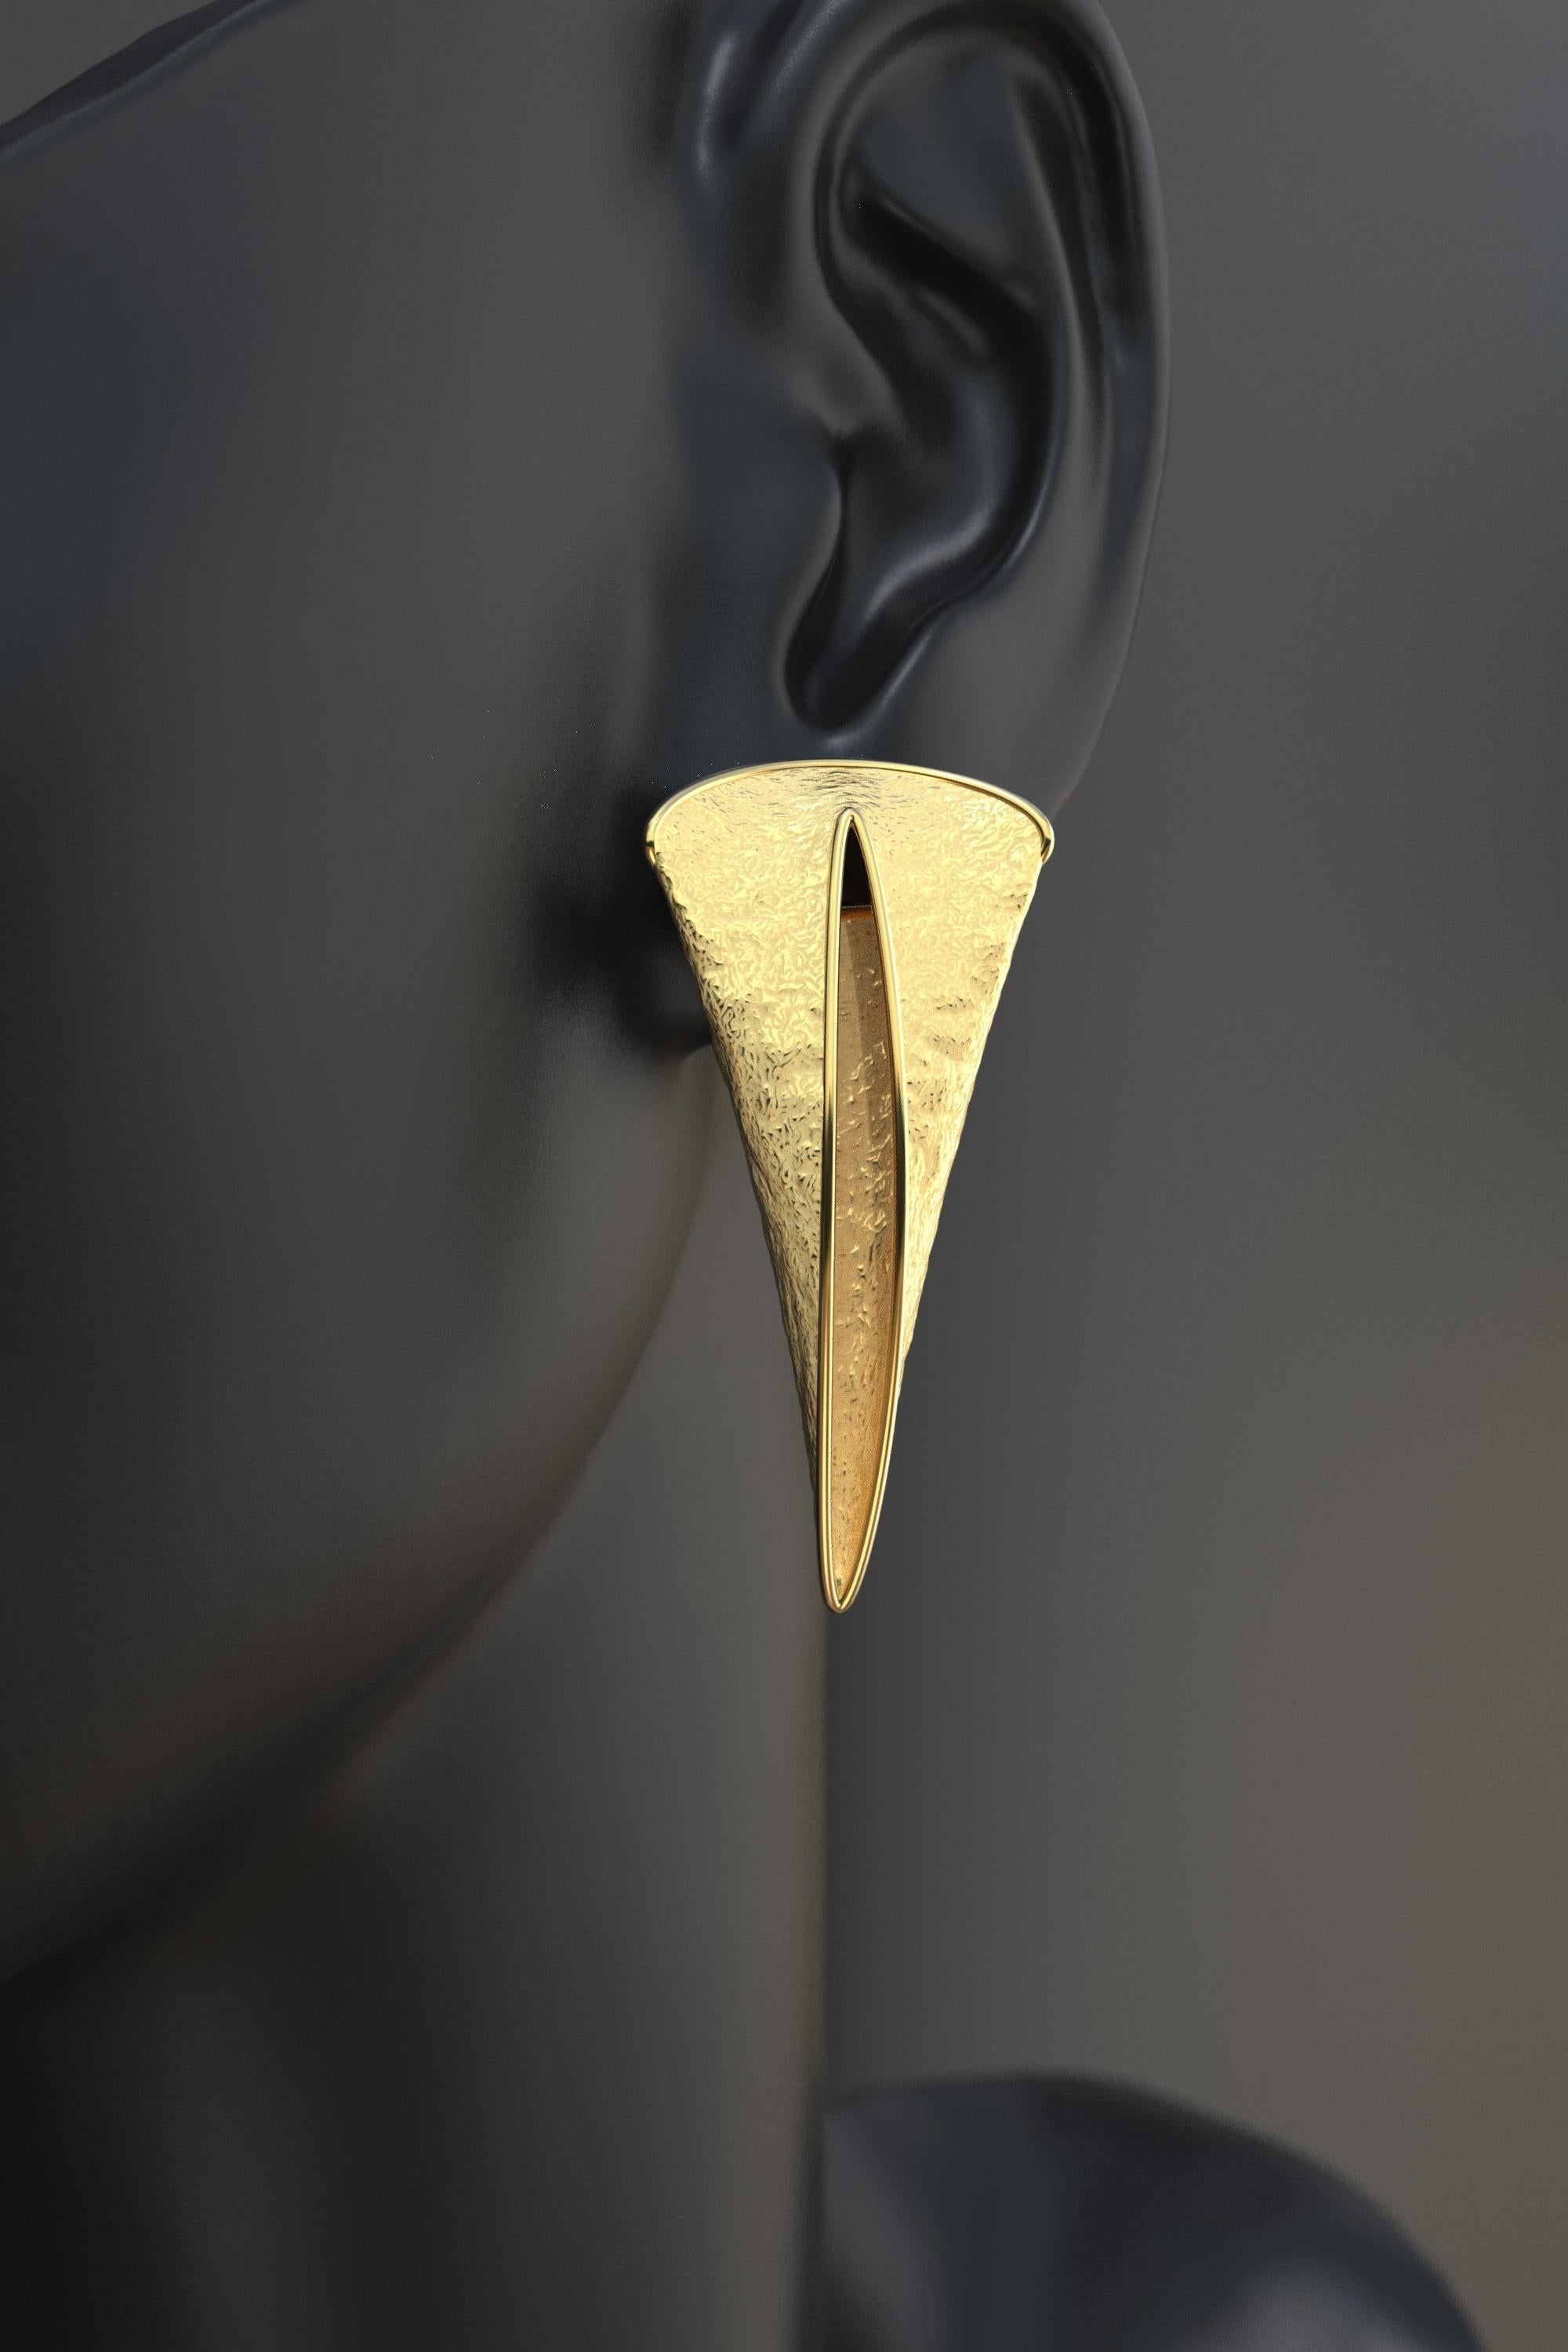 Women's Bold 14k Gold Earrings Handmade in Italy by Oltremare Gioielli, Thorn Shaped. For Sale